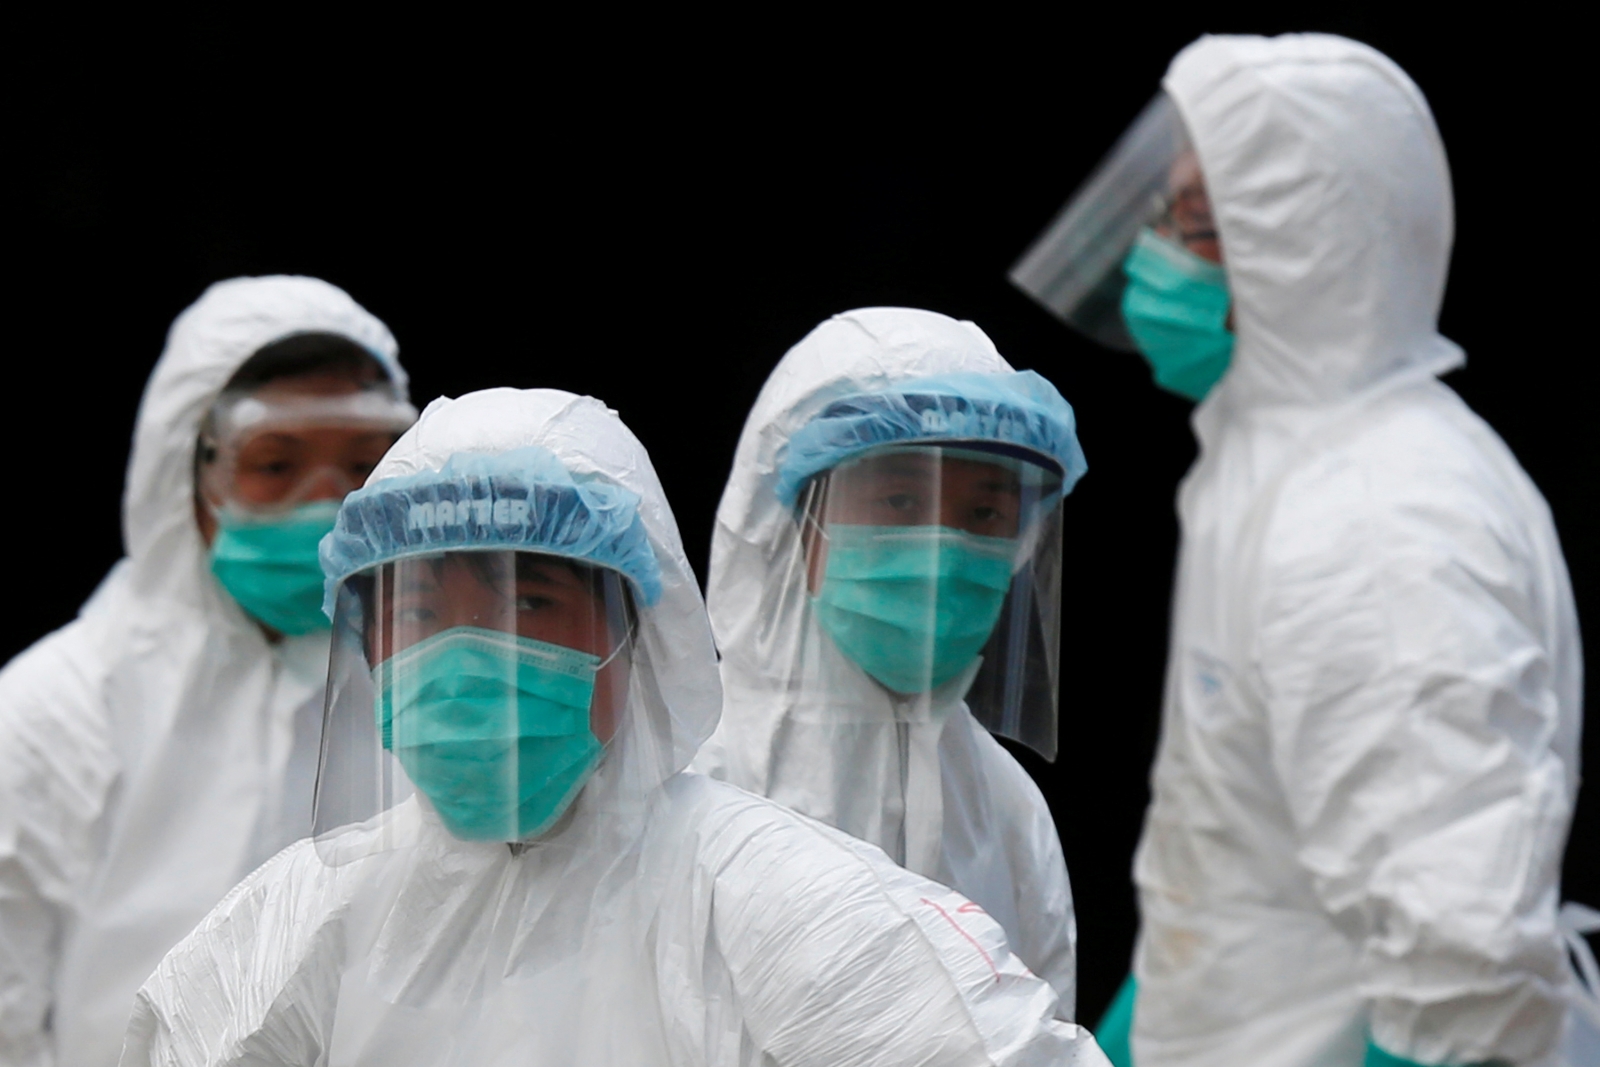 Bird flu affects half of mainland China as WHO asks authorities to be